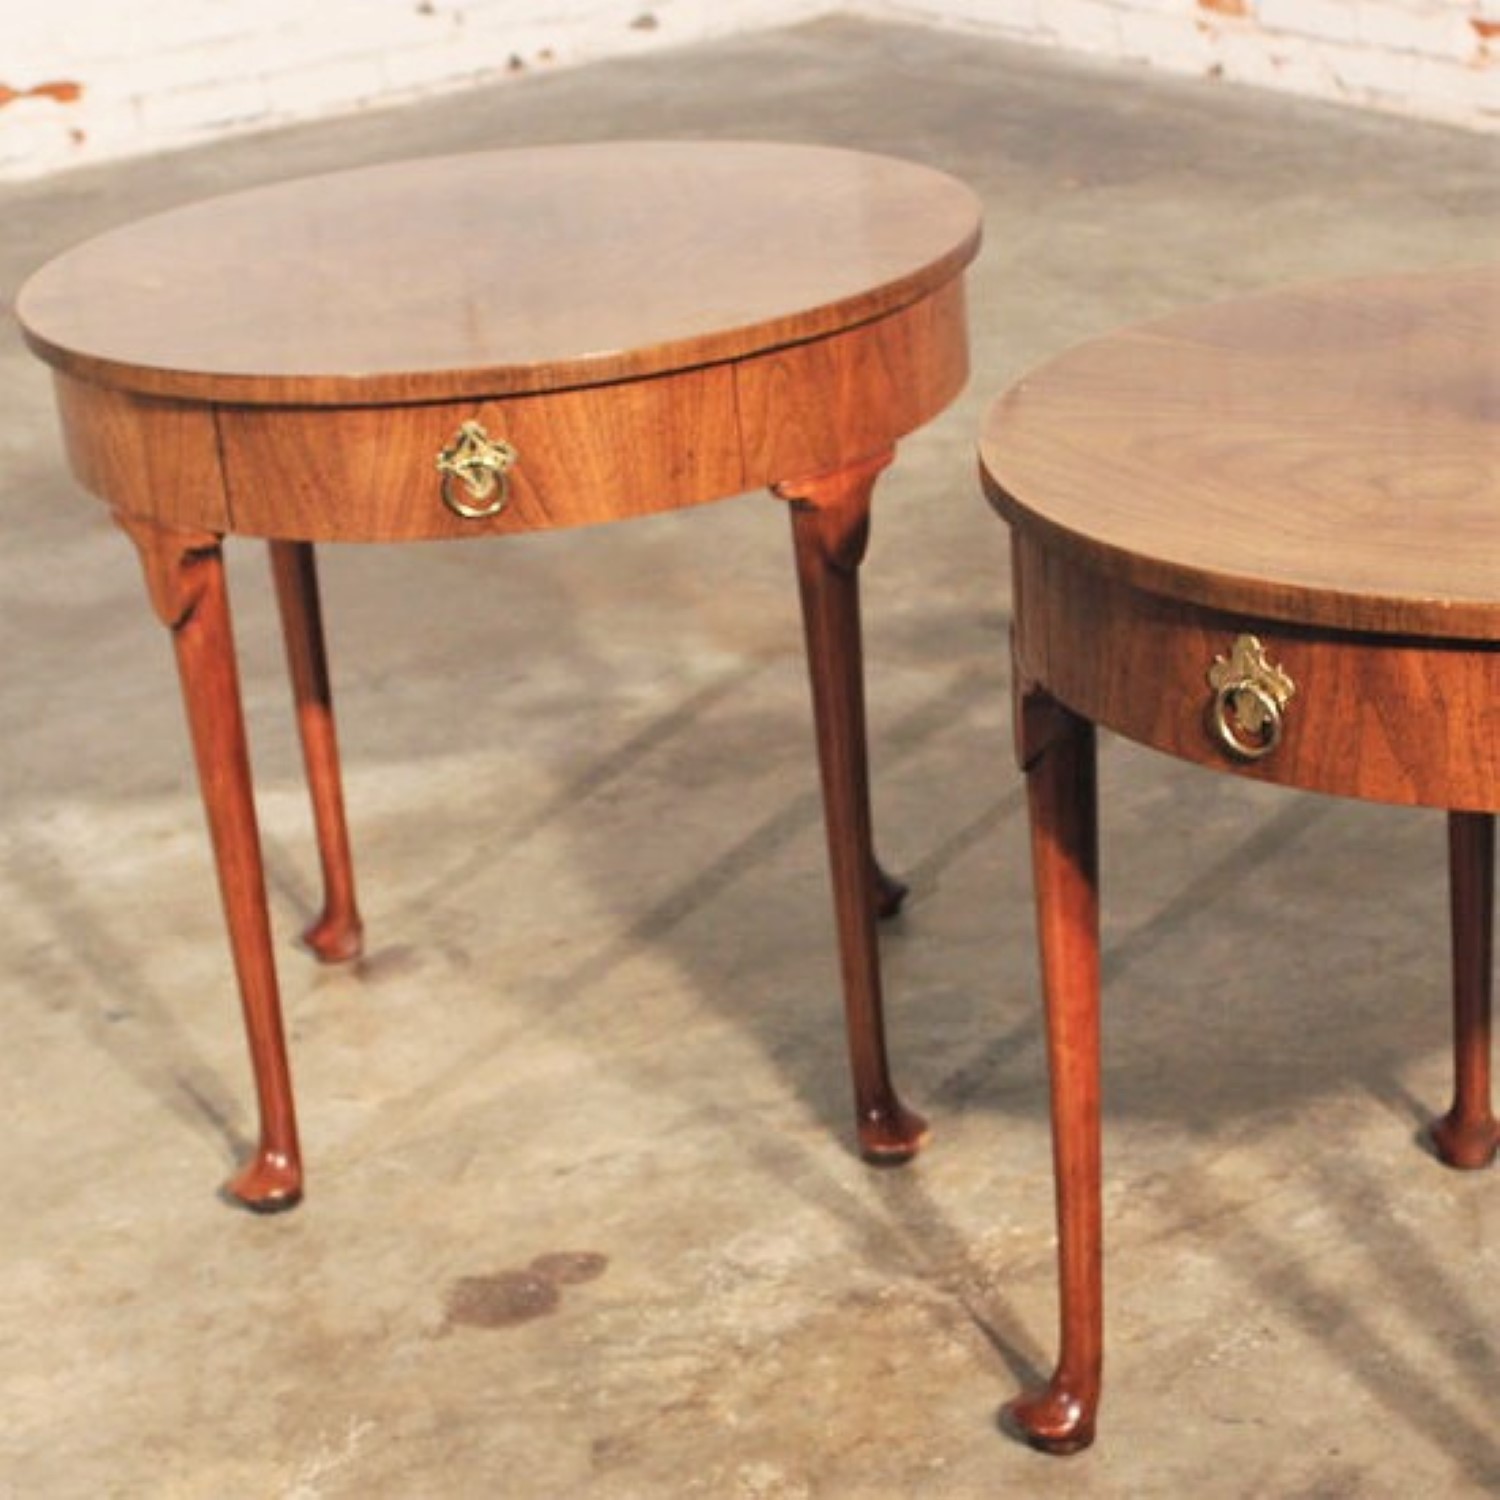 Baker Georgian Style Round End Tables, Vintage Round End Tables